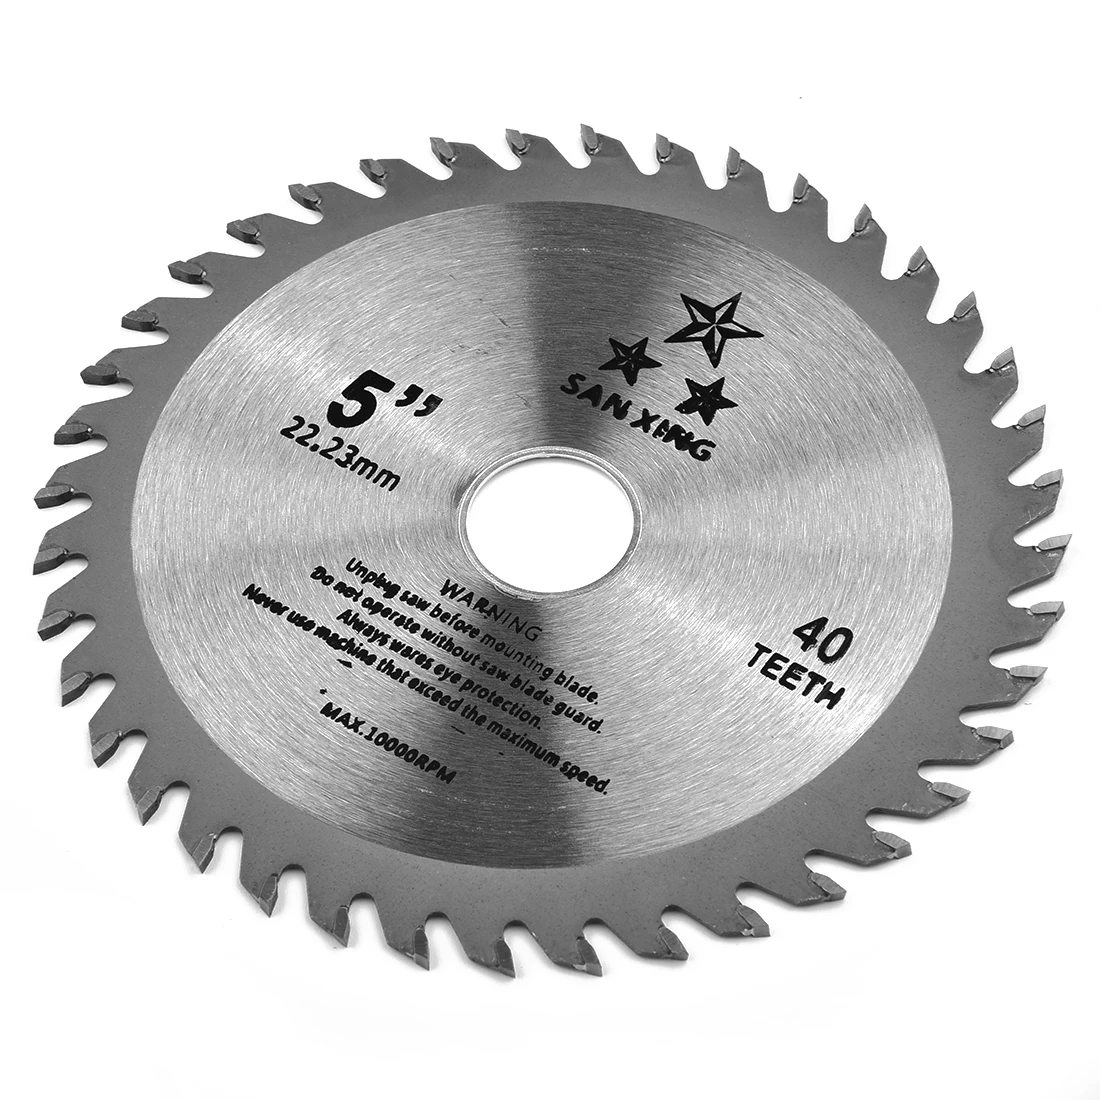 

5Inch Circle Saw Blade Woods Cutter Table Cutting Disc For Carbide Tipped Oscillating Carpentry Tools Accessories Woodworking